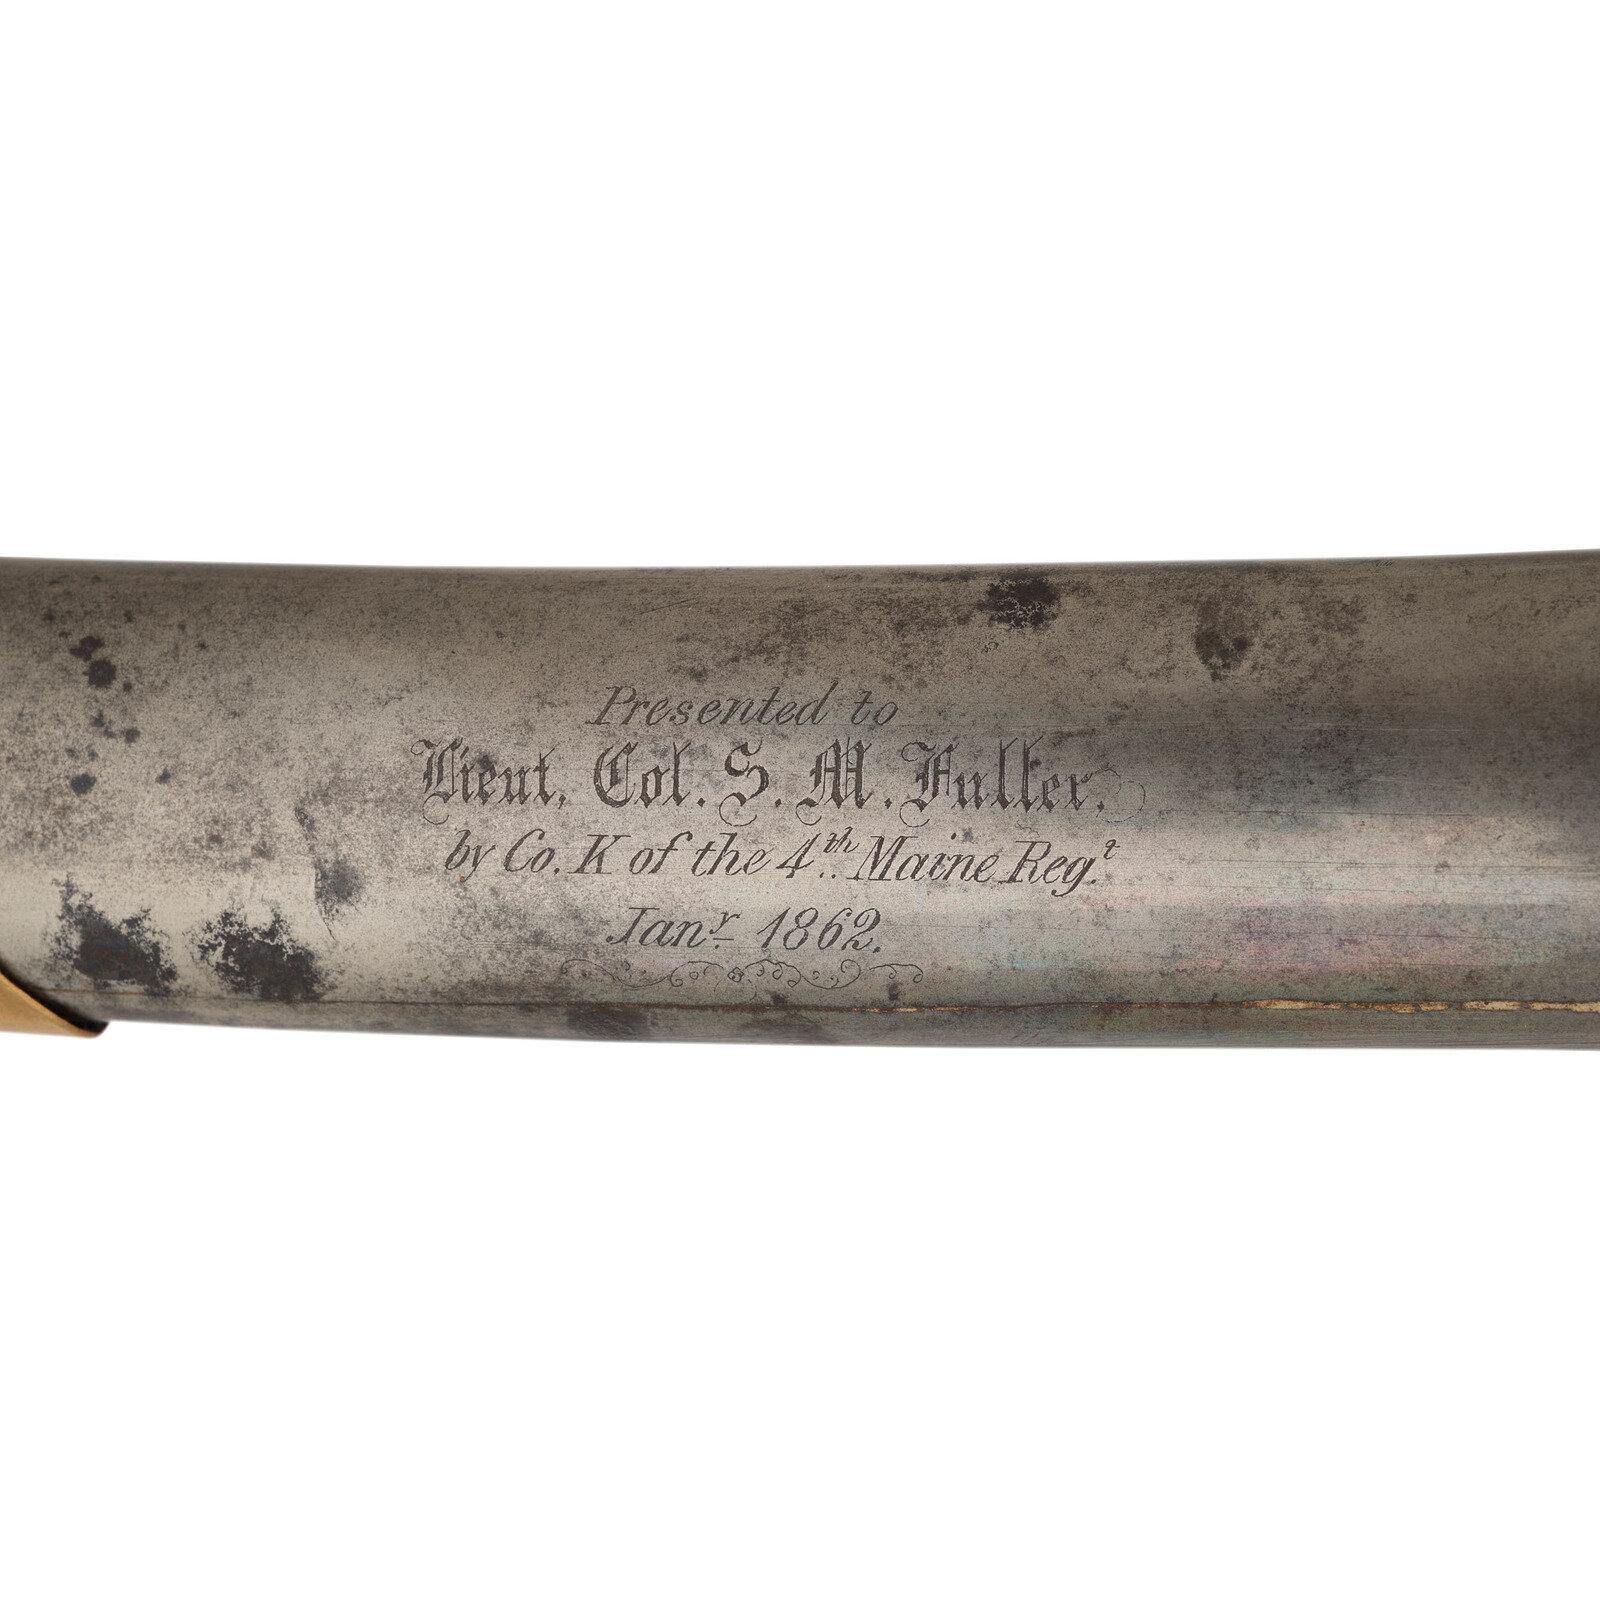 Published Tomes, Son & Melvain Field Grade Cavalry Officers' Sword Presented to Lt. Col. S.M. Fuller